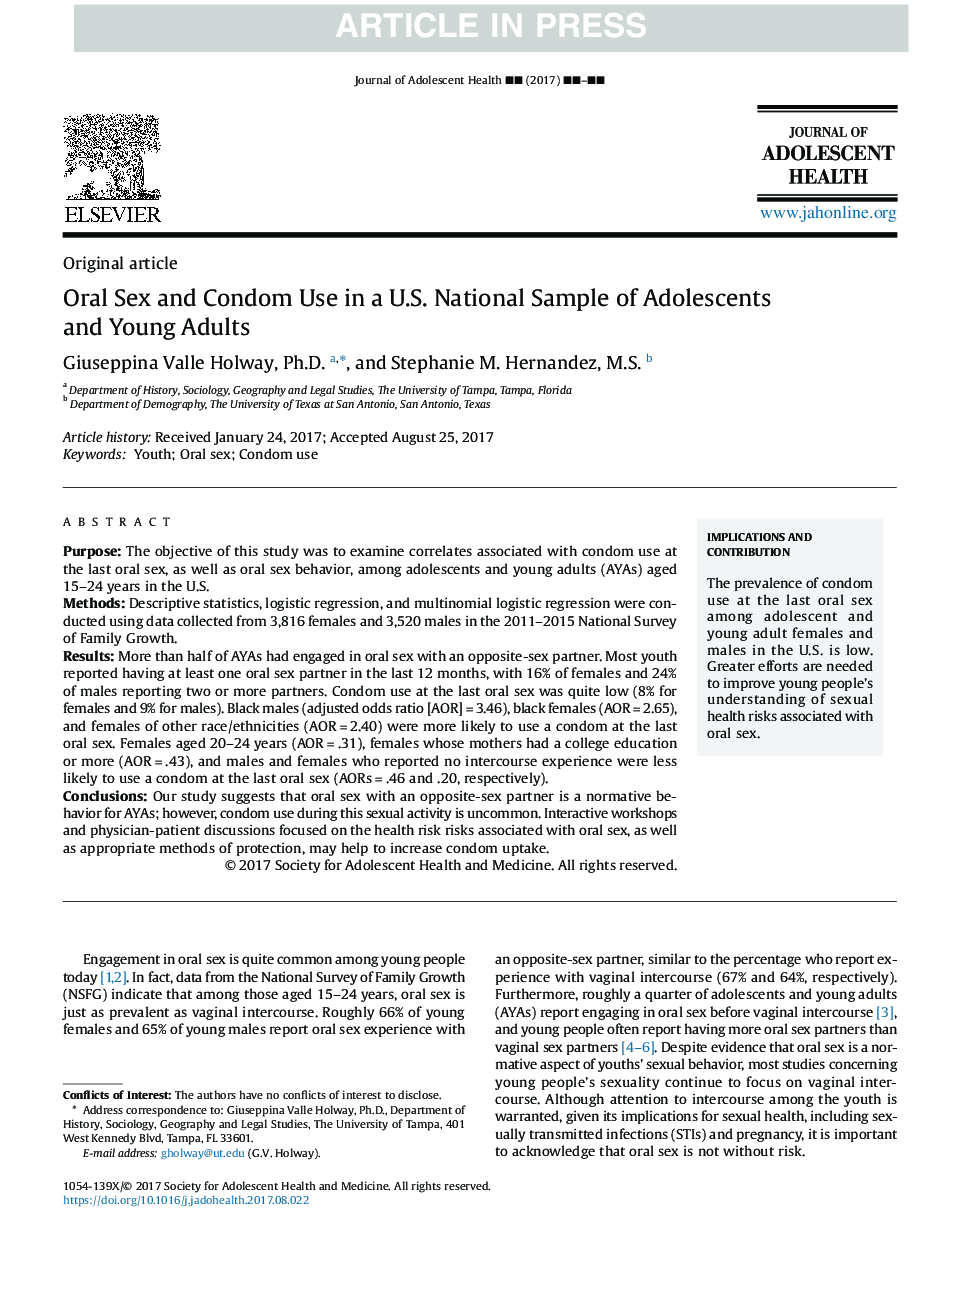 Oral Sex and Condom Use in a U.S. National Sample of Adolescents and Young Adults